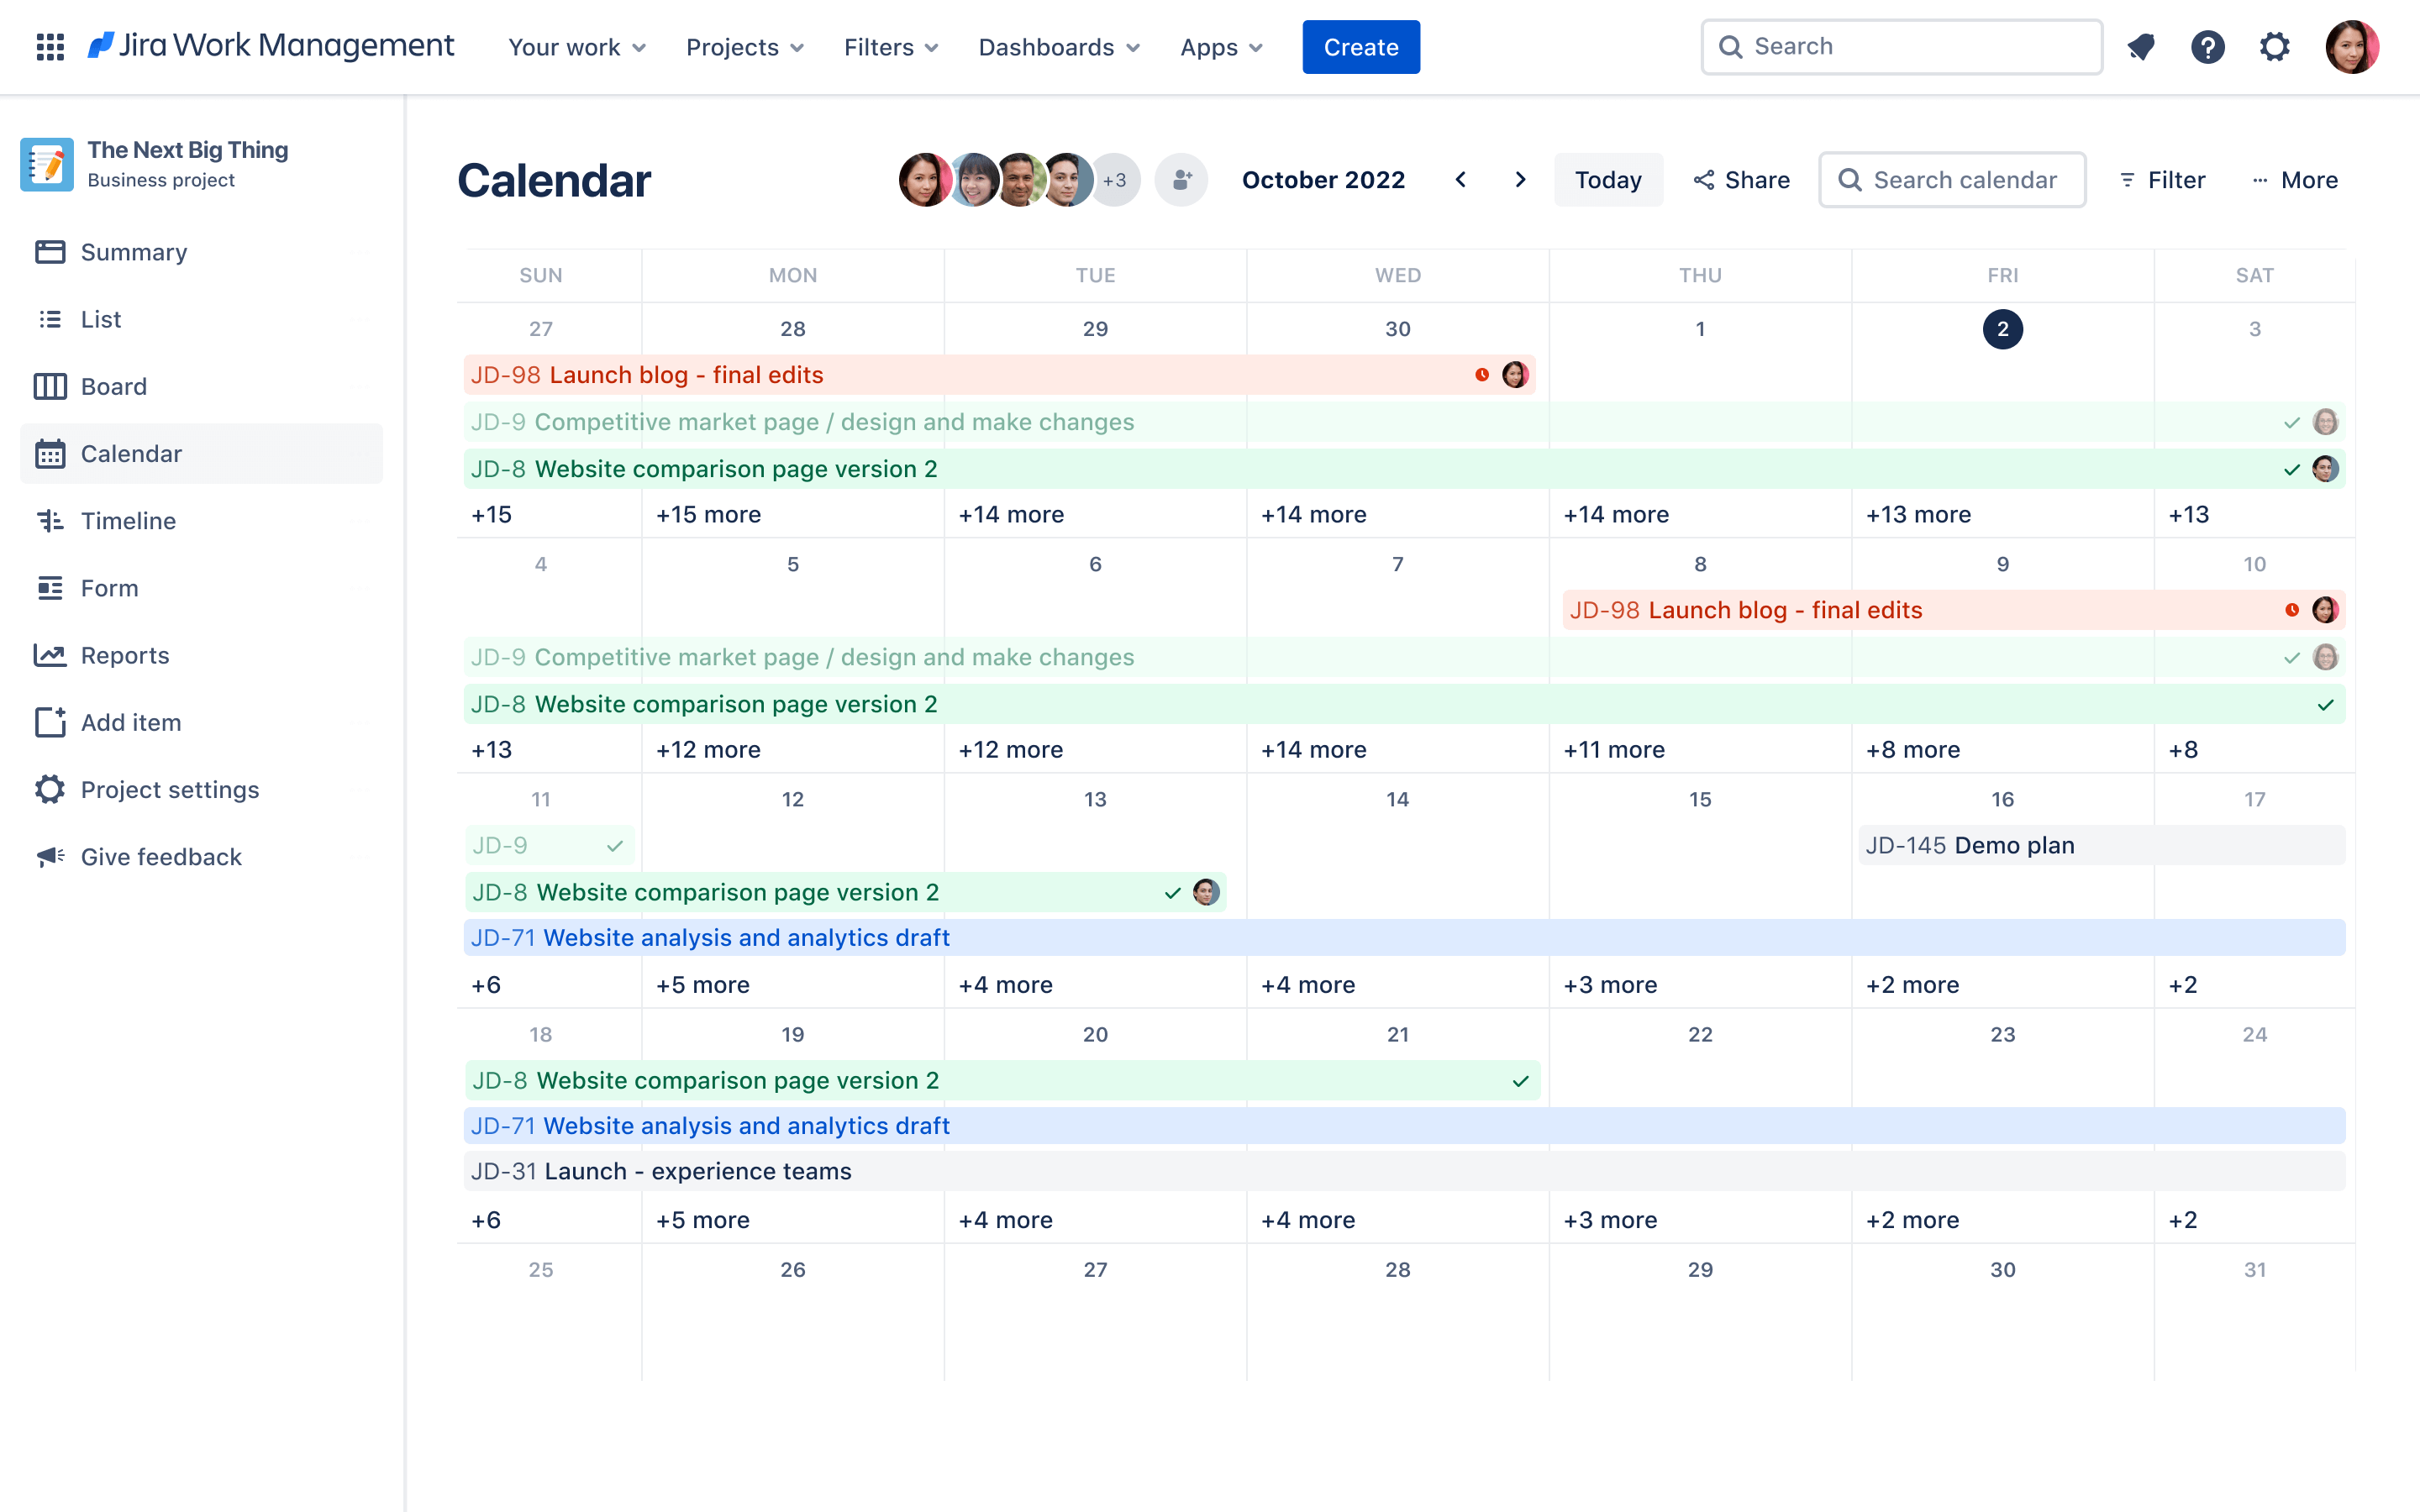 Jira Work Management calendar view showing the calendar month with various programs, events, and tasks in different stages of completion and assigned to different team members.